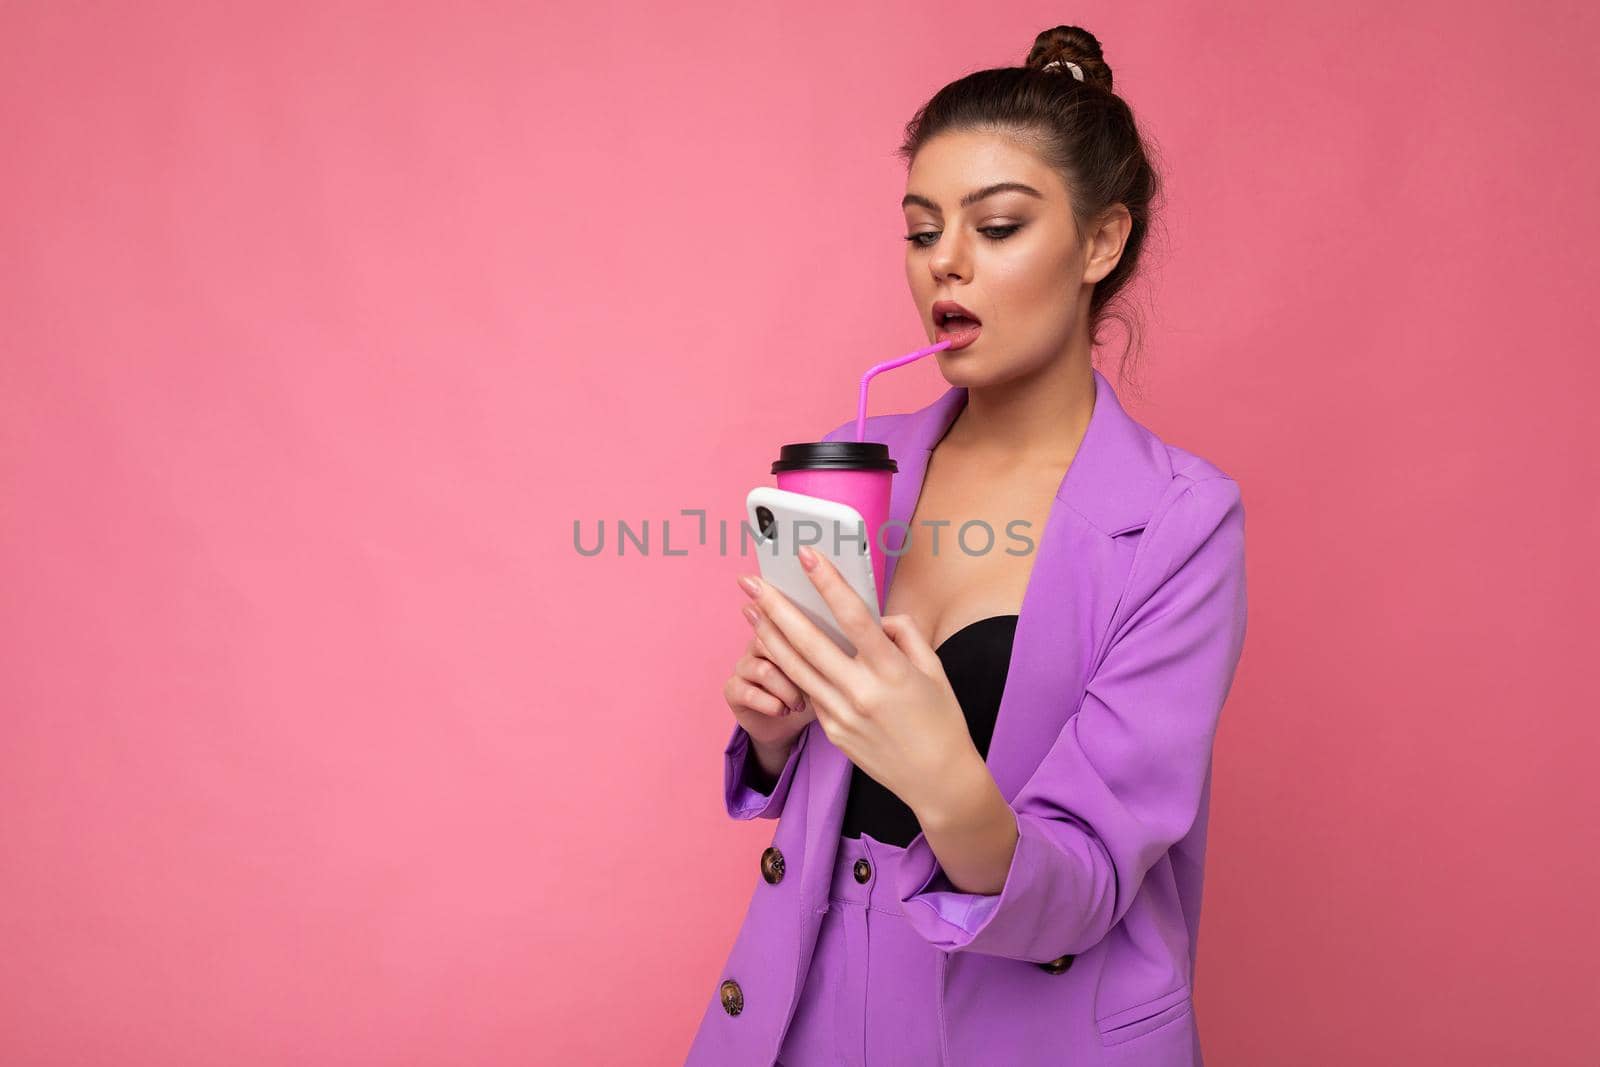 Young sexy positive woman isolated over pink background with copy space holding coffee to take away and a mobile phone.